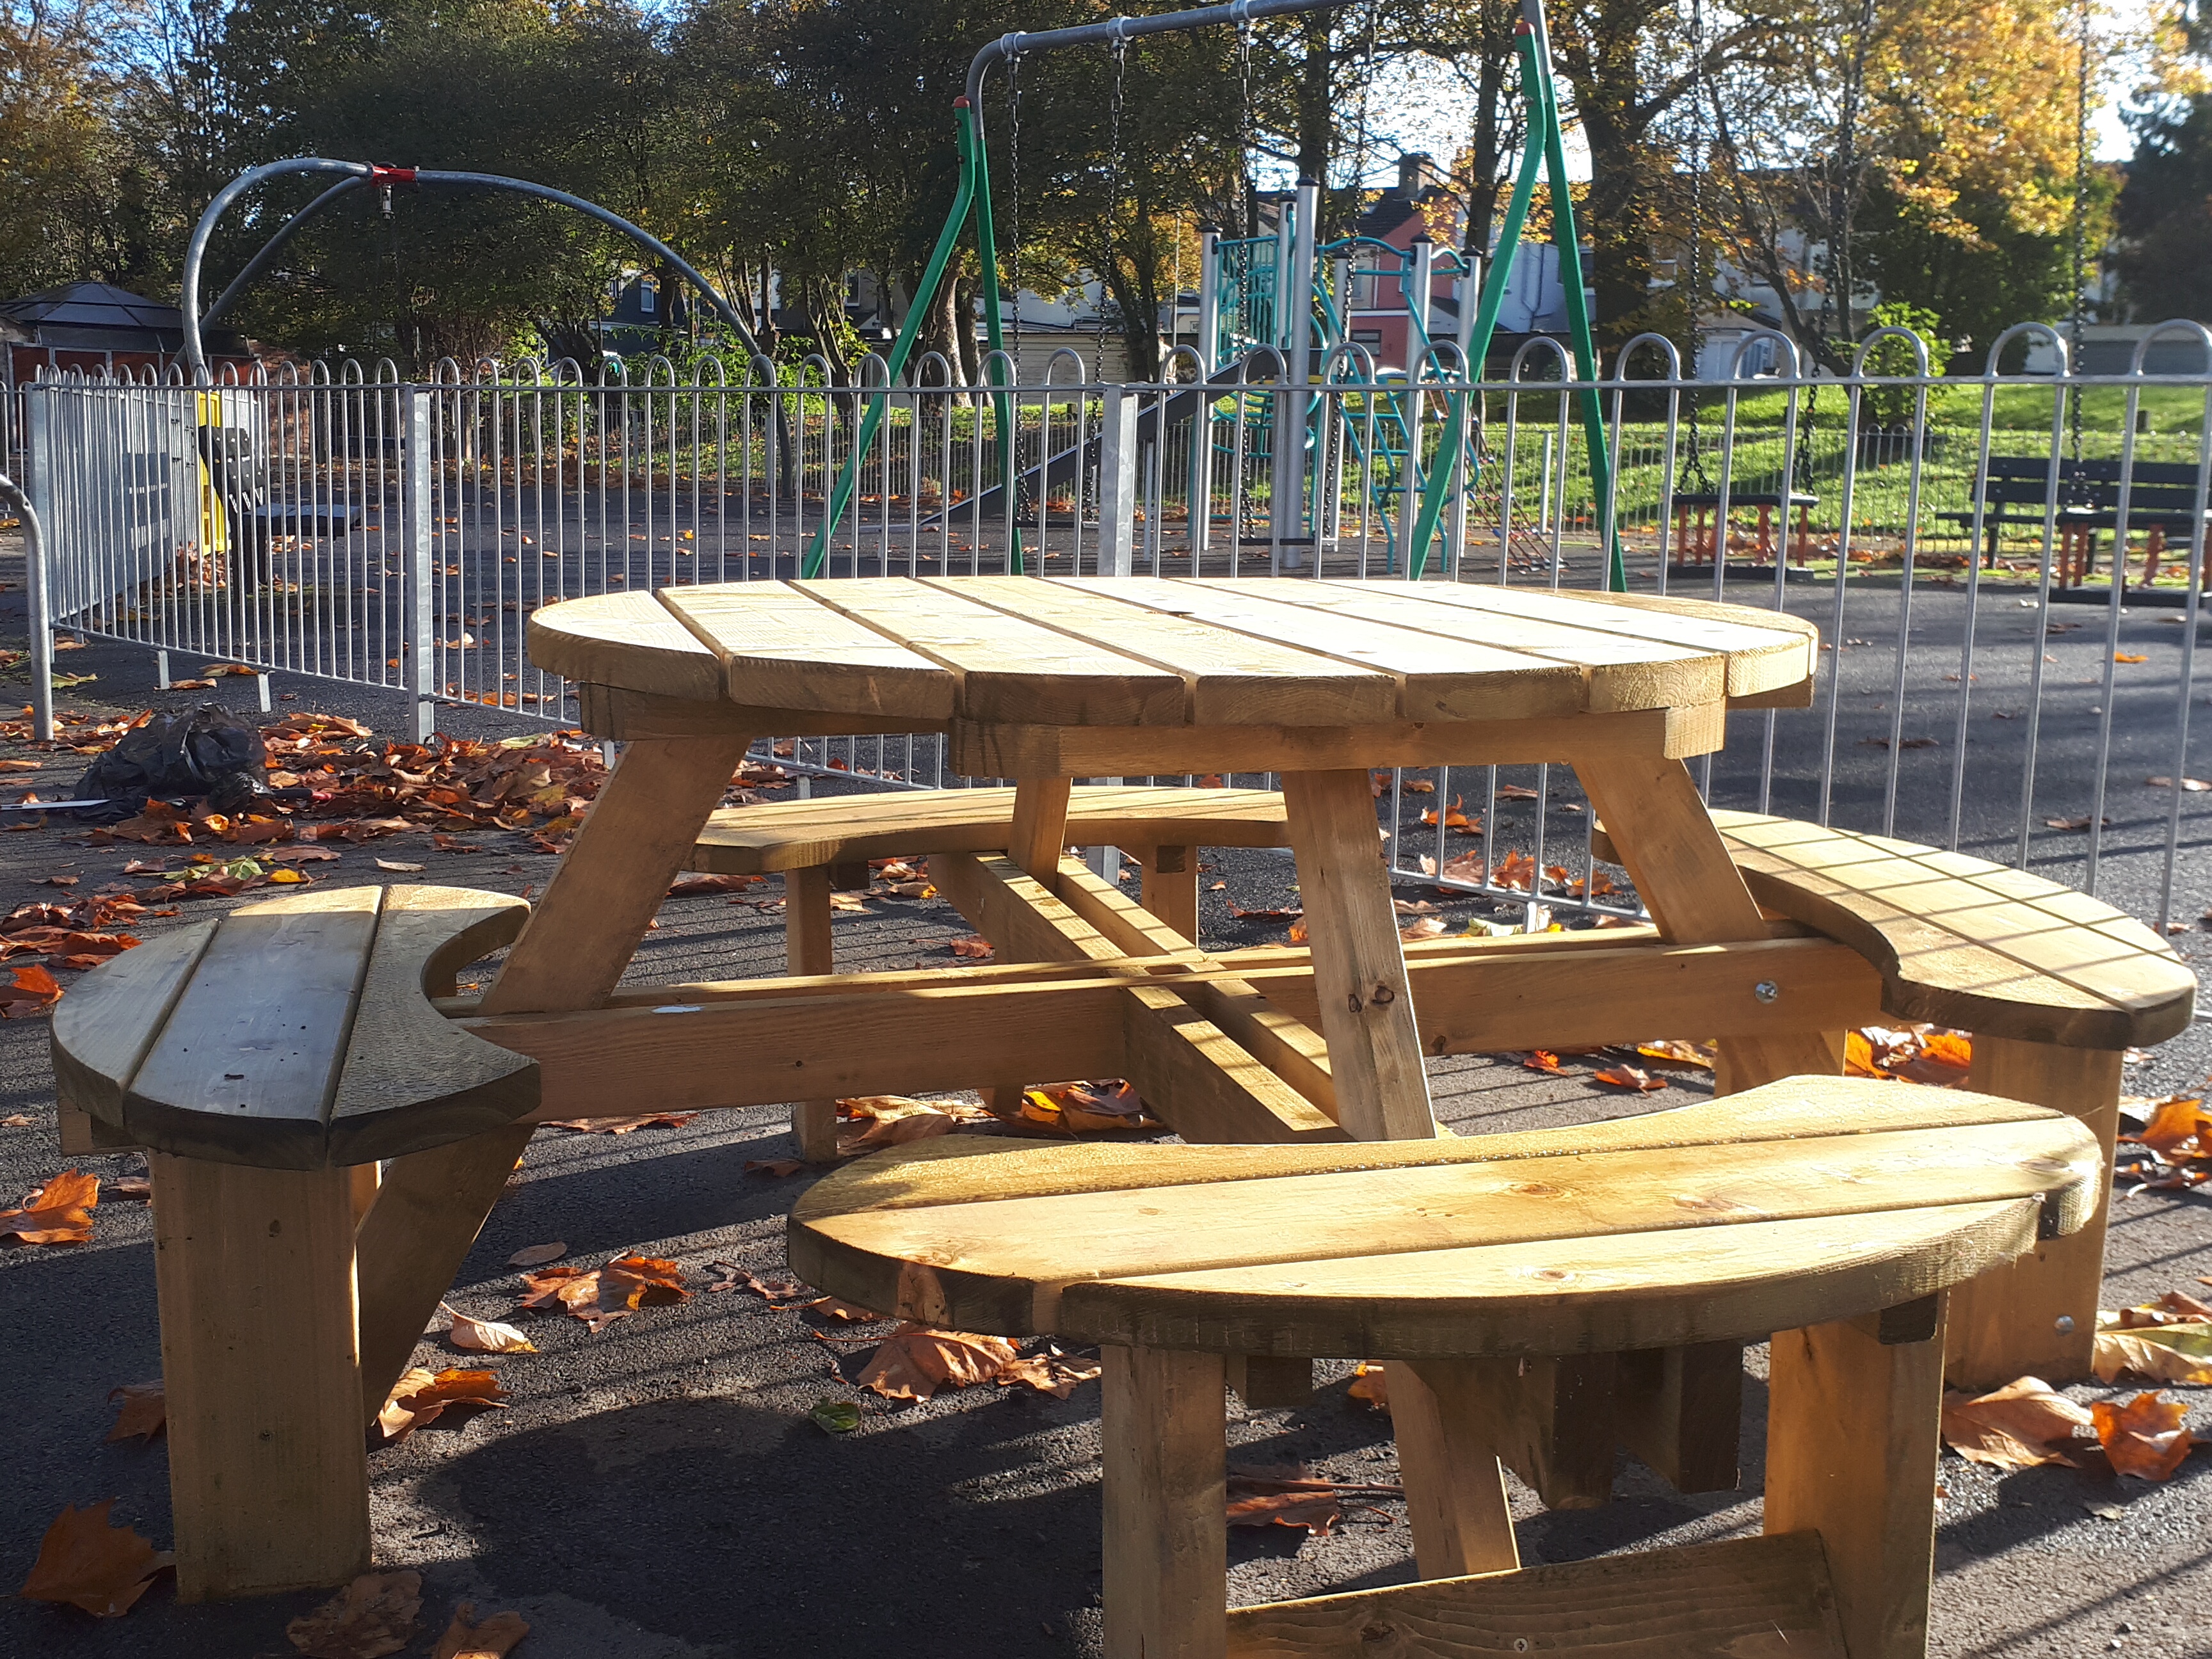 Picnic table by playground